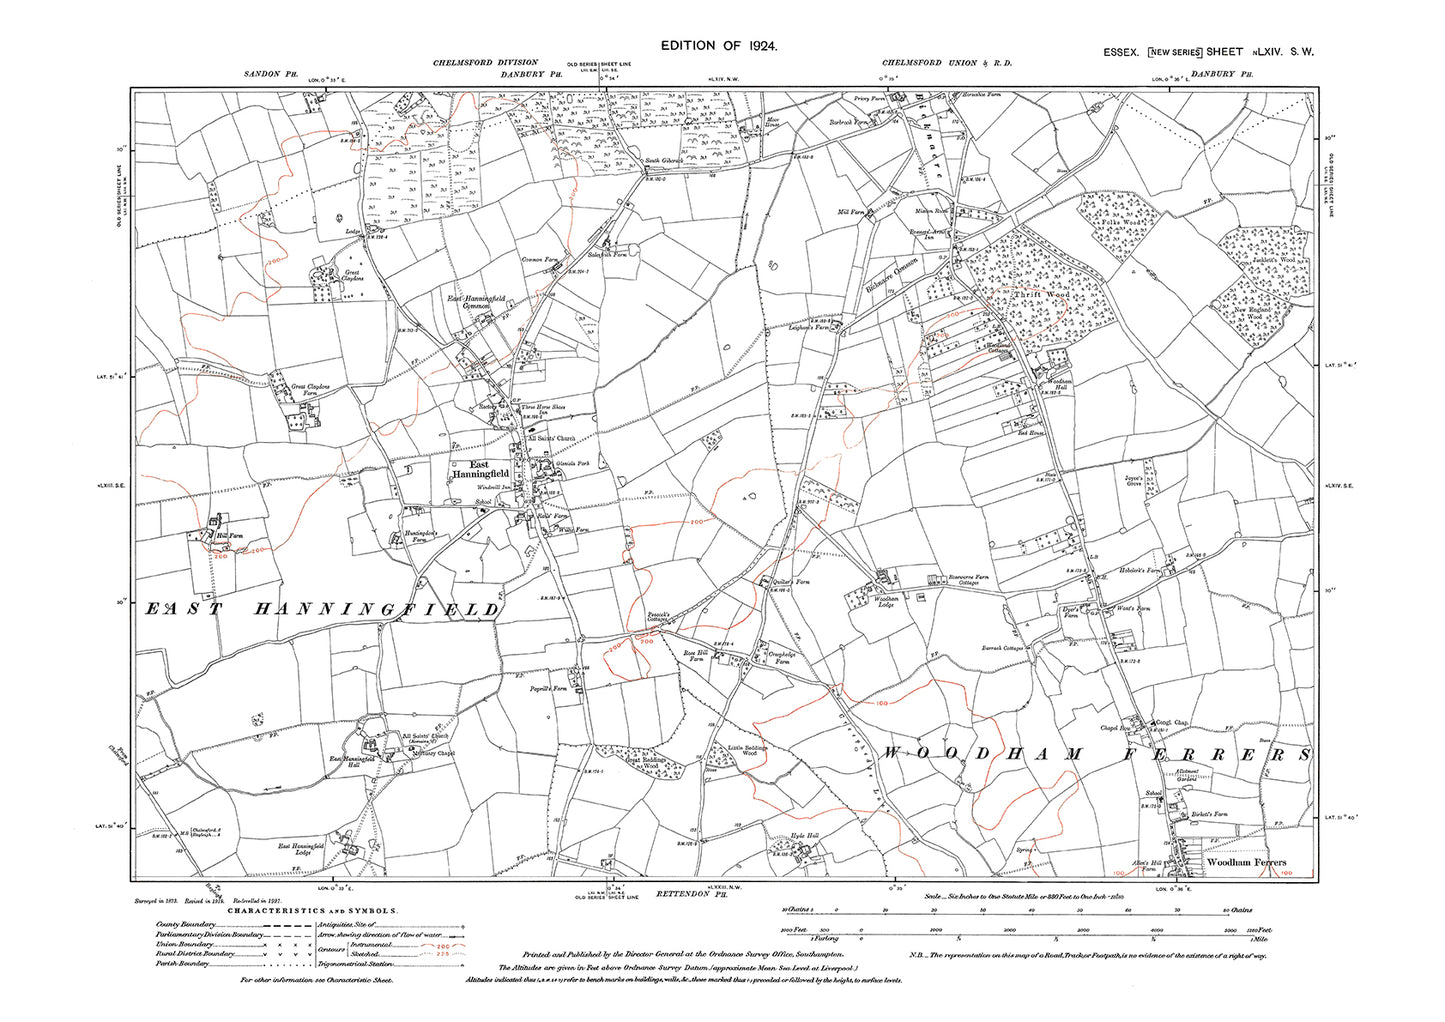 Old OS map dated 1924, showing East Hanningfield, Bicknacres and Woodham Ferrers (north) in Essex - 64SW